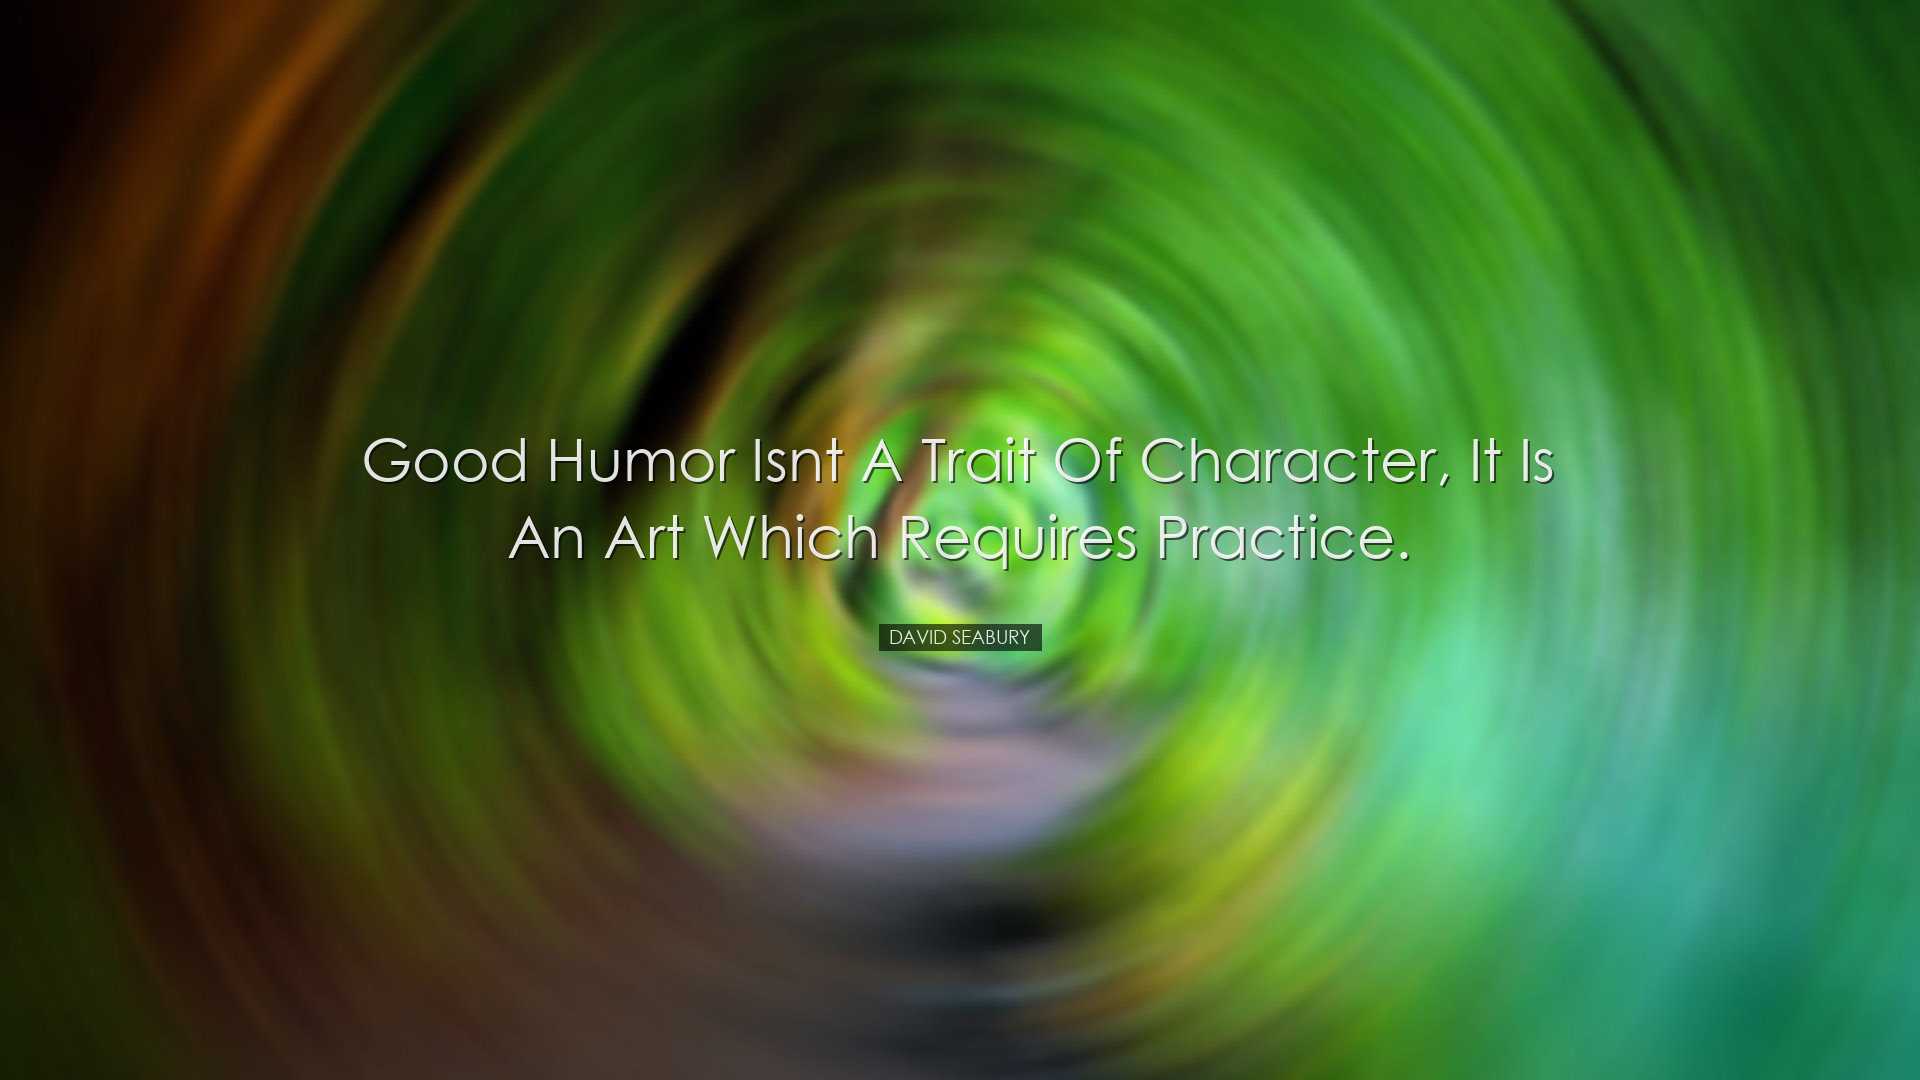 Good humor isnt a trait of character, it is an art which requires